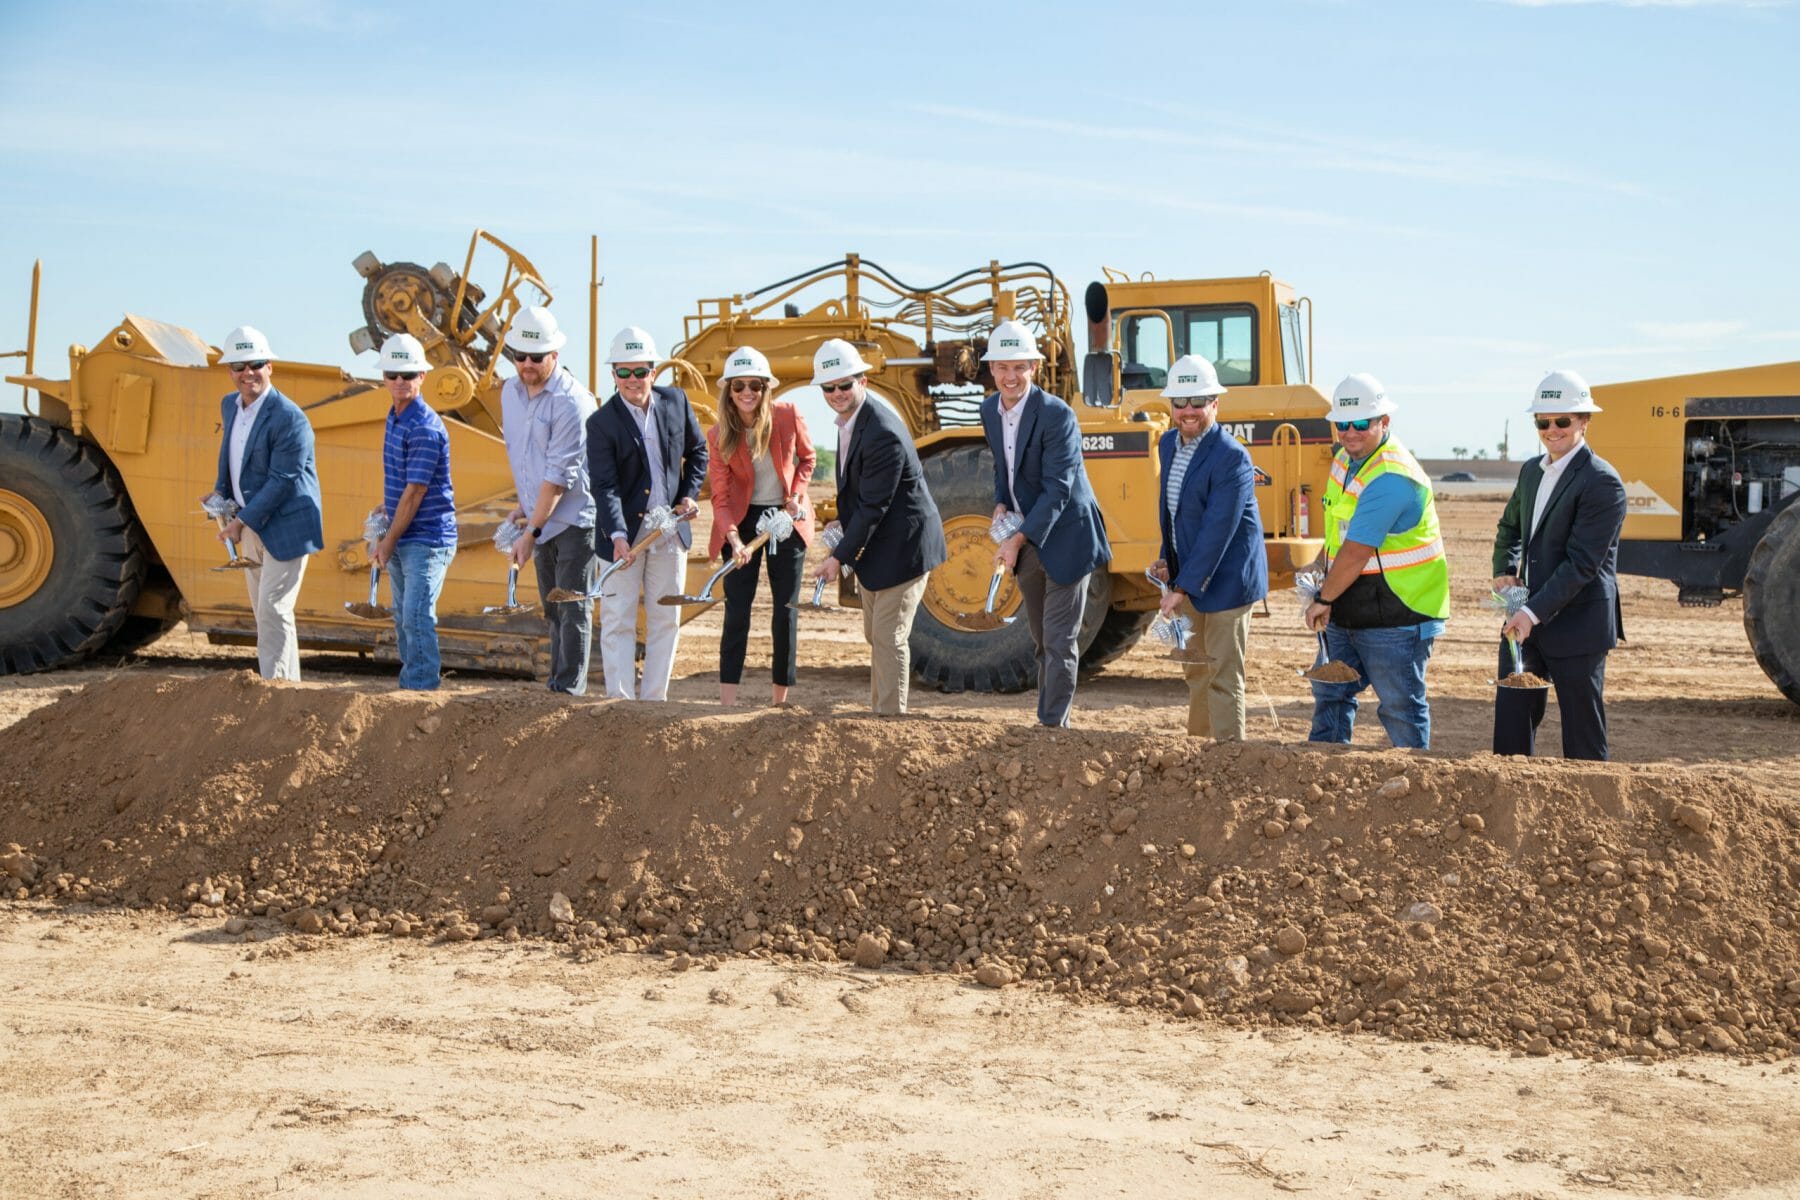 ARCO Breaks Ground on New Speculative Industrial Project in Goodyear, Arizona 1